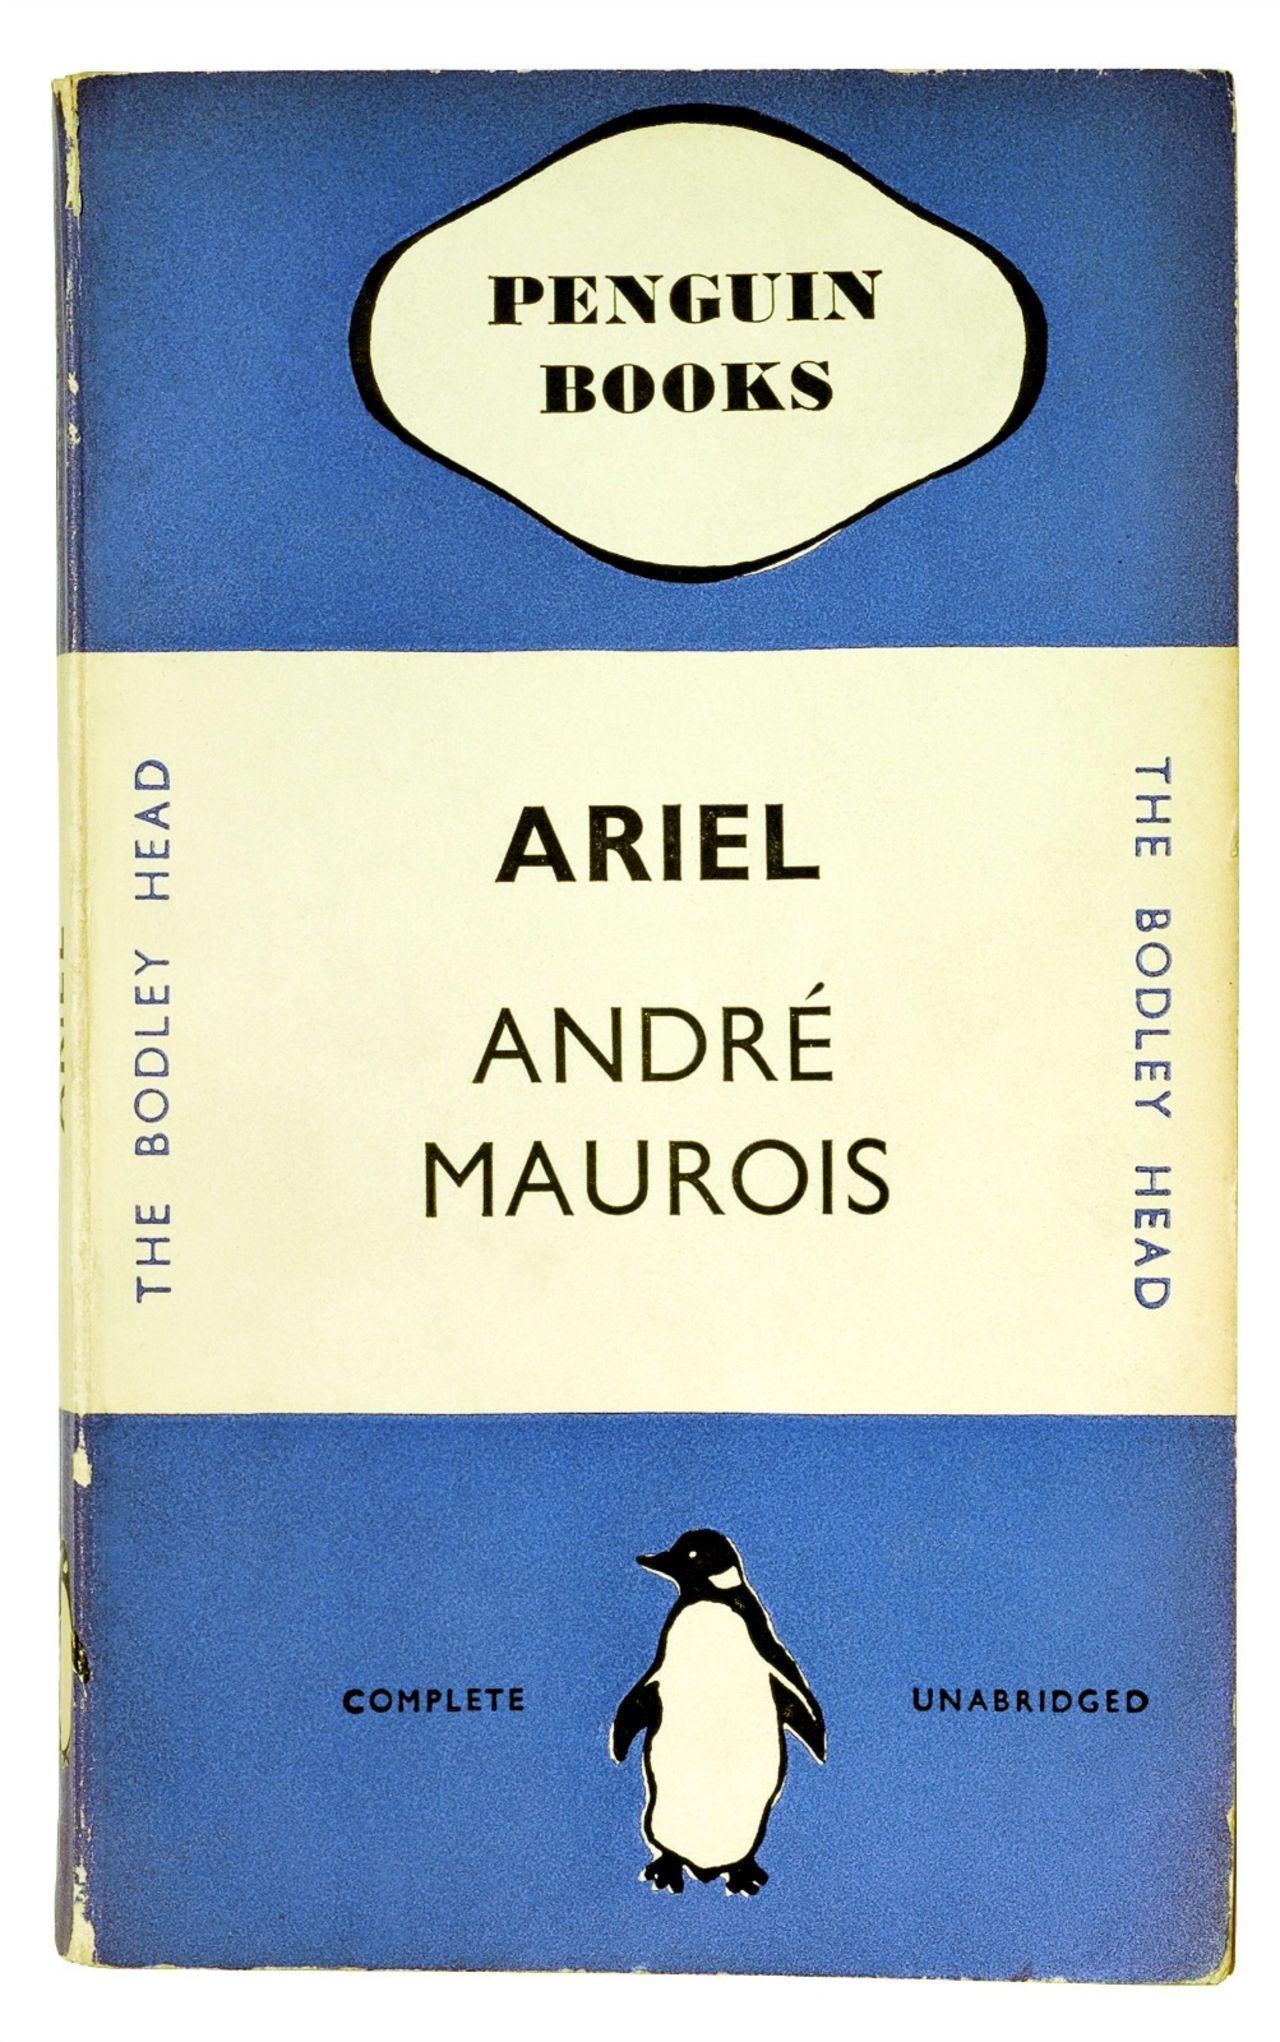 Penguin's classic covers originate from the publishing house's first book, "Ariel," by André Maurois, published in 1935. It was designed by Penguin's first production manager, Edward Young. This was also the birth of the distinctive Penguin logo, which Young sketched using the penguins at London Zoo as models.<br />